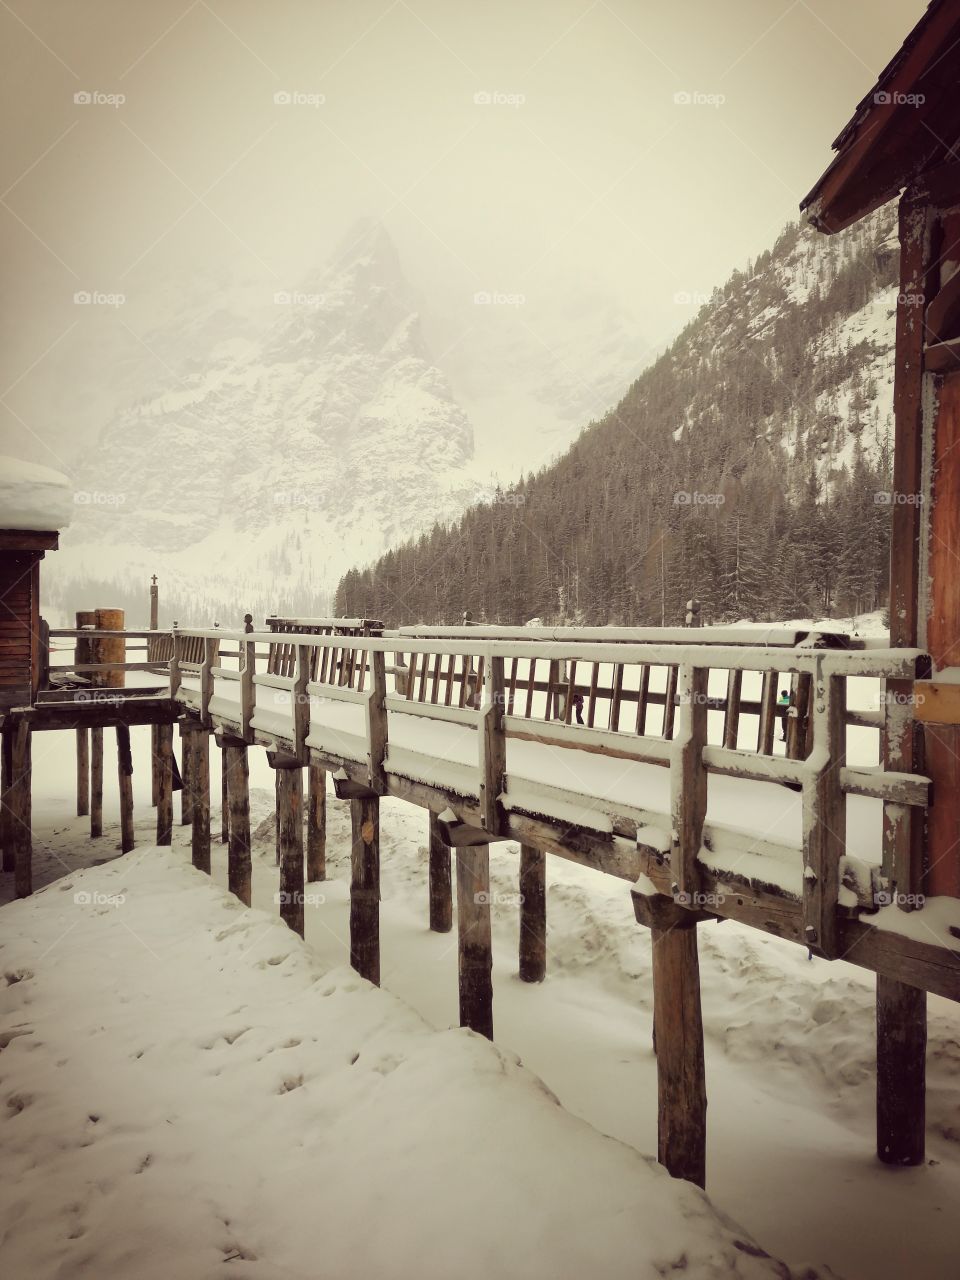 Wooden made piers covered by snow at